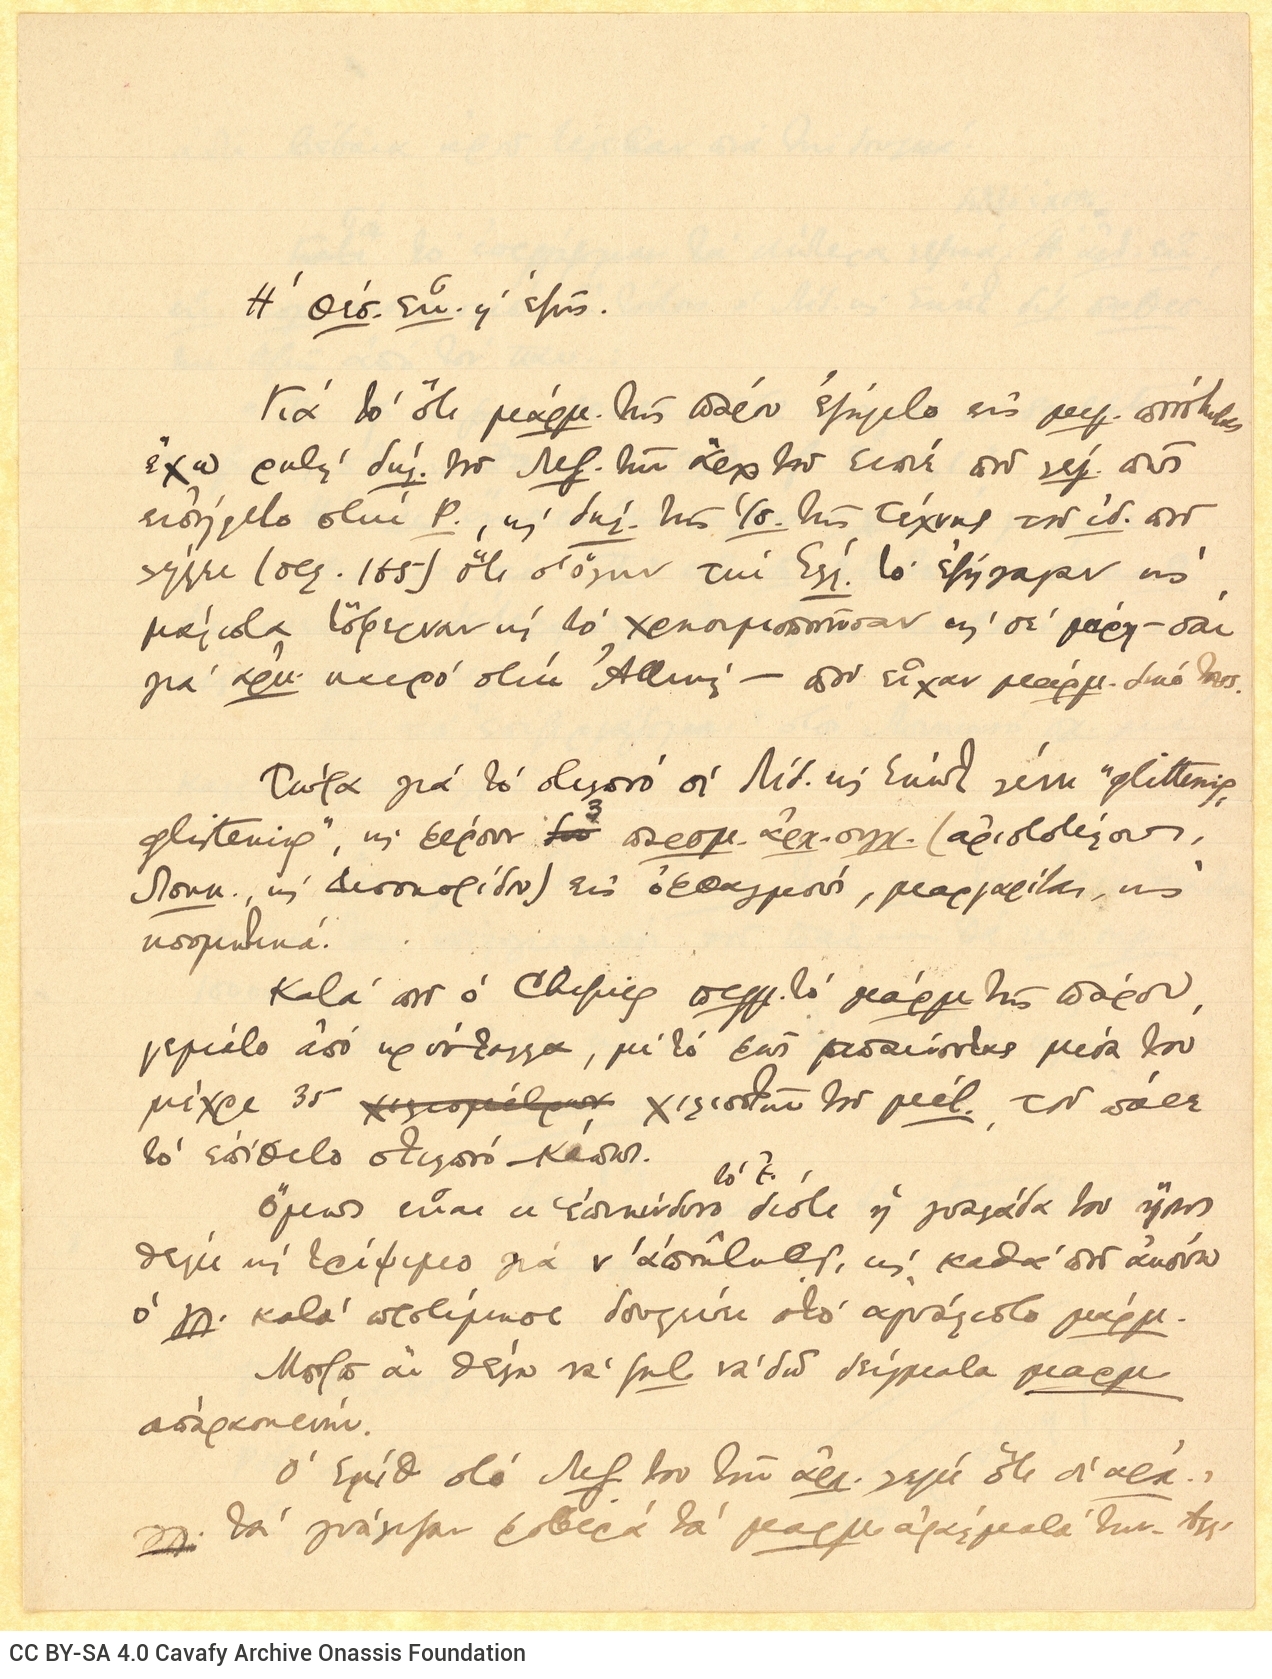 Handwritten notes in ink on the first and third pages of a ruled double sheet notepaer. Note in pencil at the bottom of th